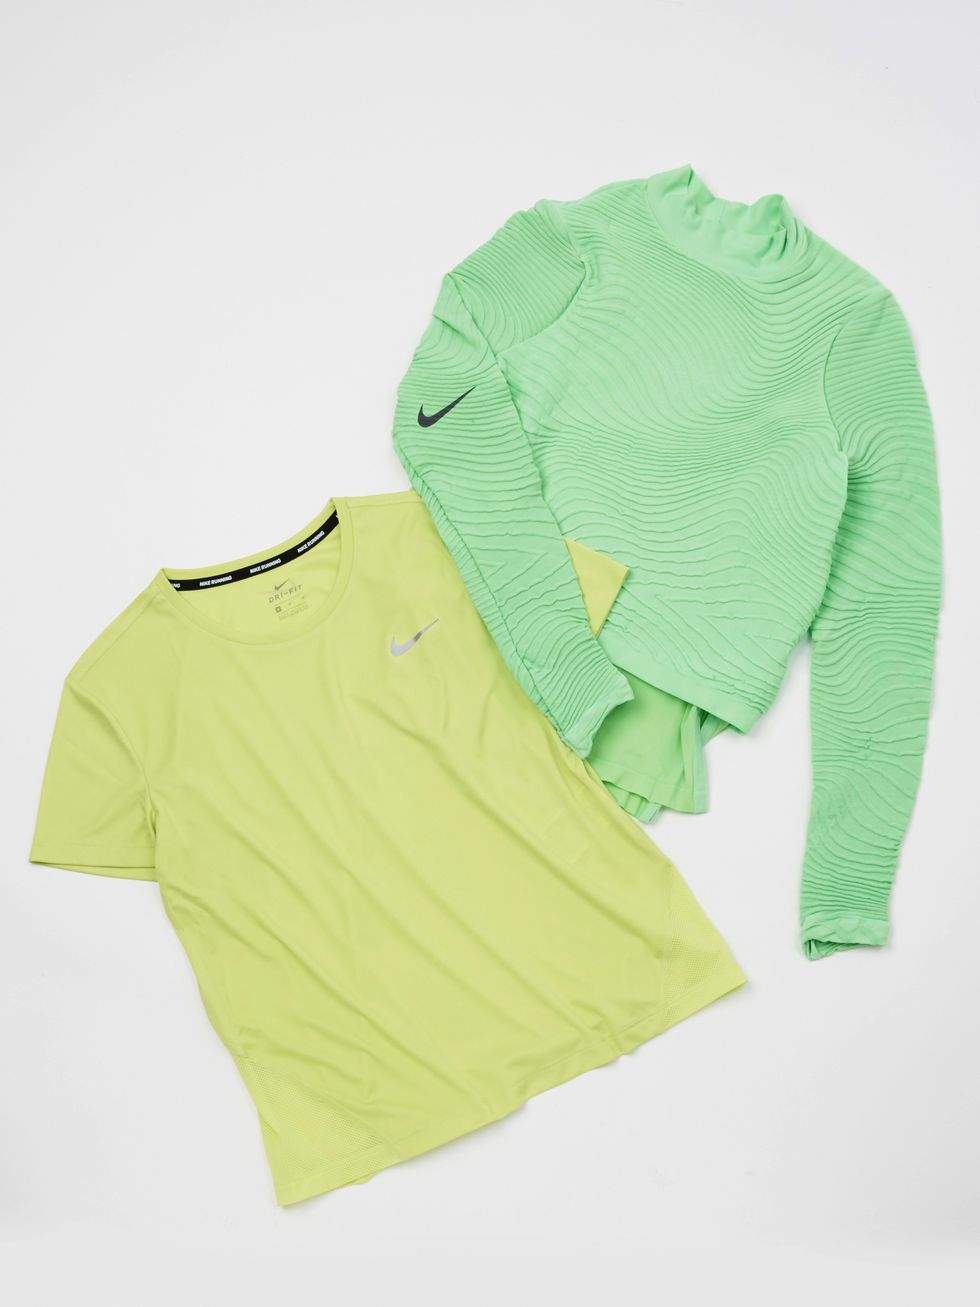 Clothing, Sleeve, Green, Yellow, T-shirt, Product, Outerwear, Sweater, Top, Long-sleeved t-shirt, 